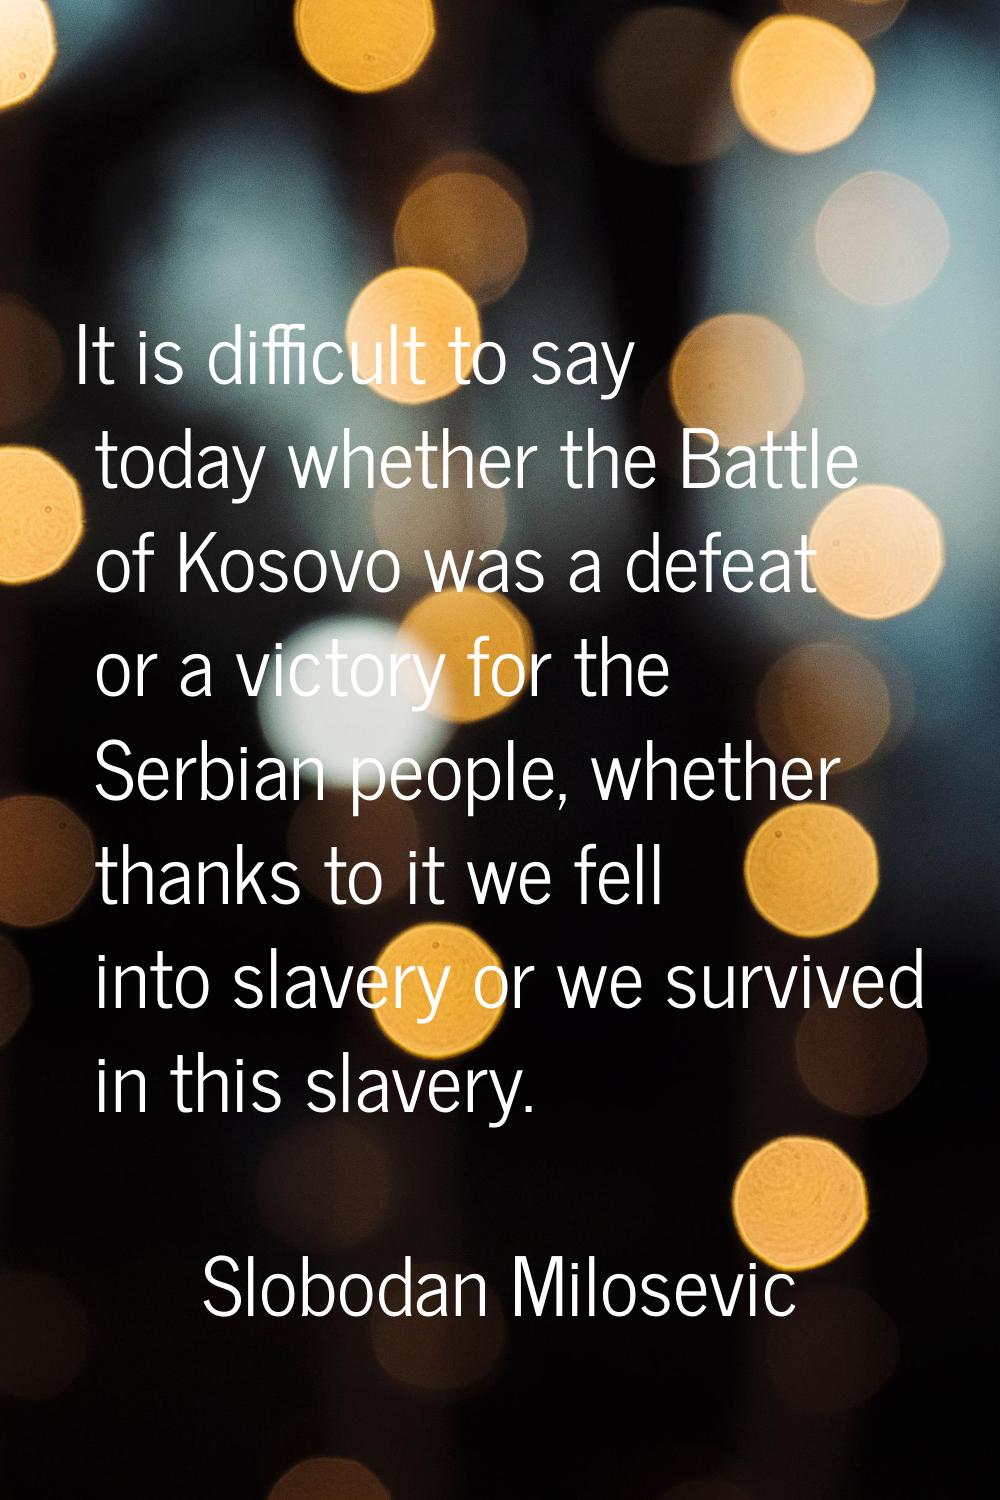 It is difficult to say today whether the Battle of Kosovo was a defeat or a victory for the Serbian